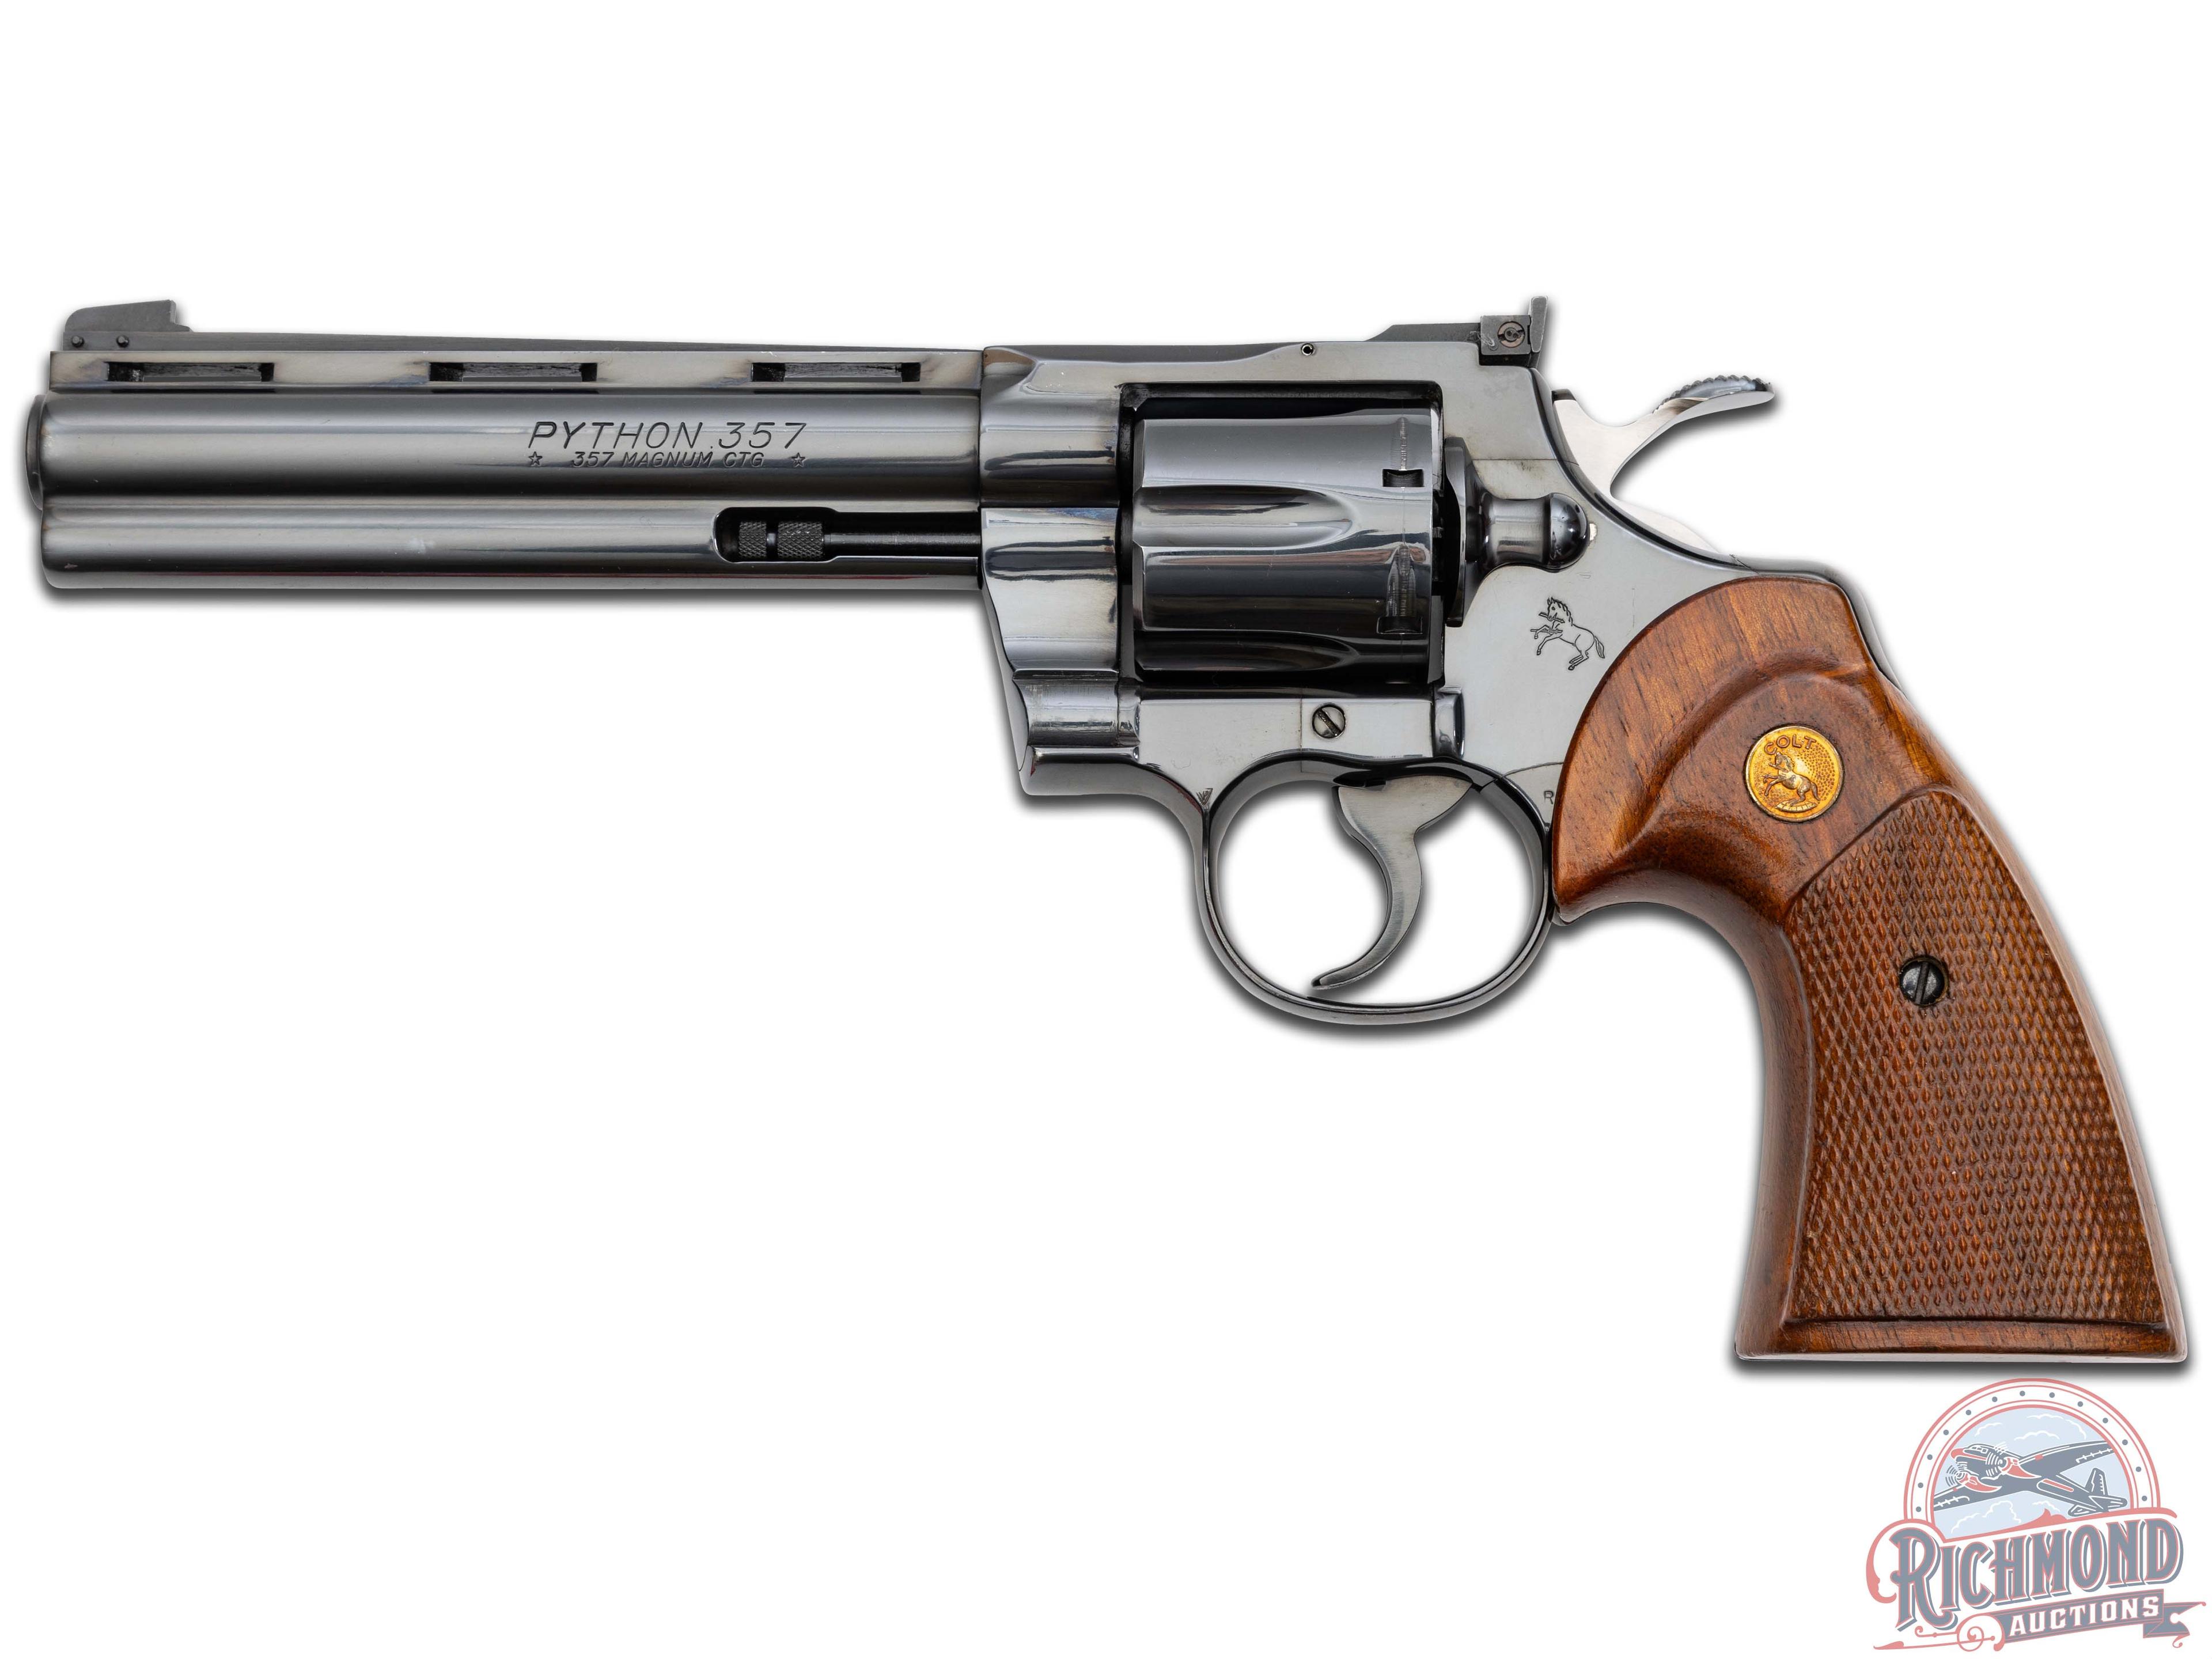 1978 Colt Python .357 Mag 6" Blued Double Action Revolver in Original Box